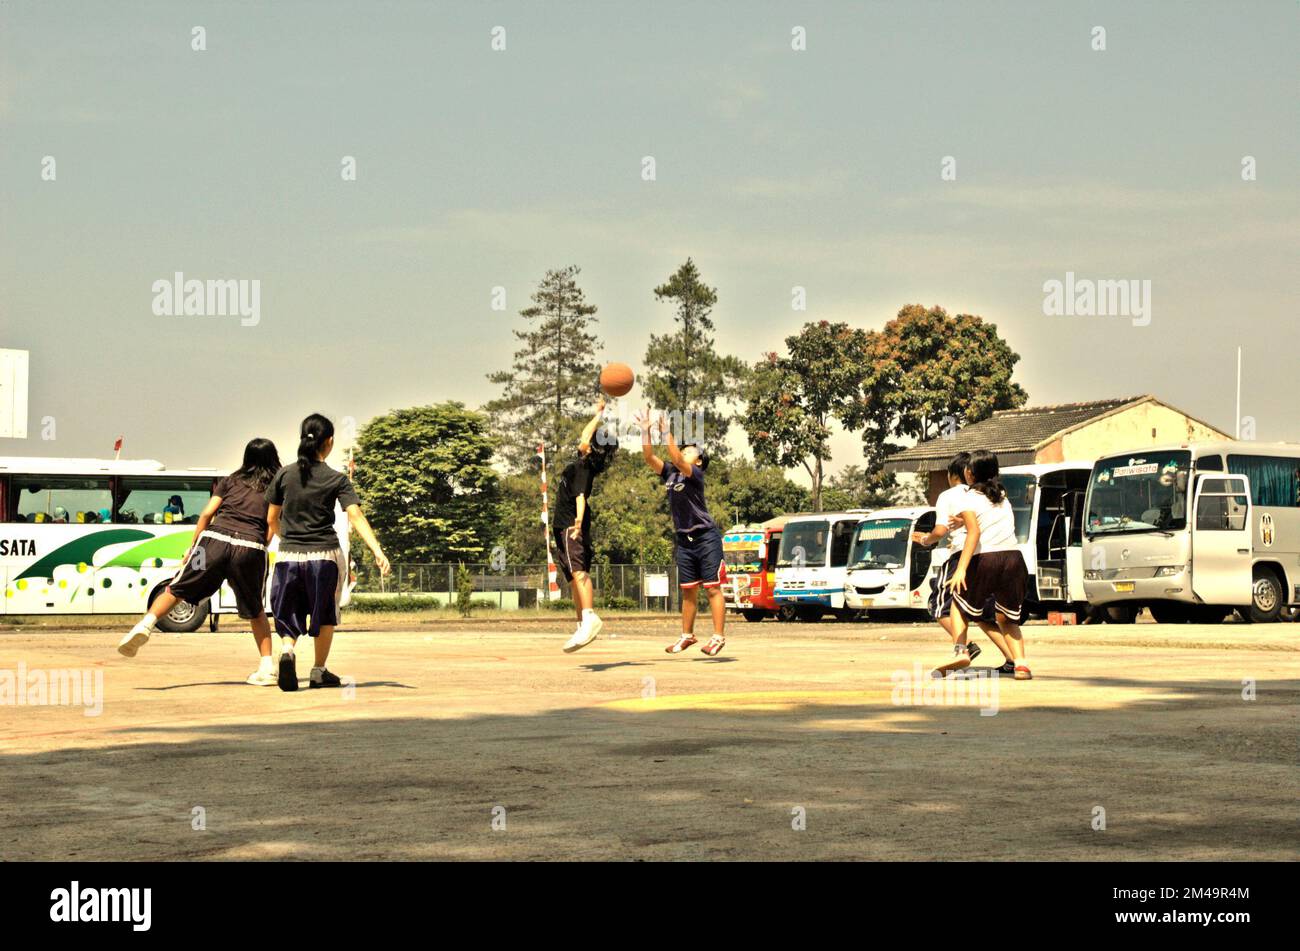 Teenagers playing basketball at a basketball field that occasionally also functioned as a parking ground for buses carrying religious tourists who want to visit Daarut Tauhiid area in Gegerkalong, Bandung, West Java, Indonesia. Stock Photo